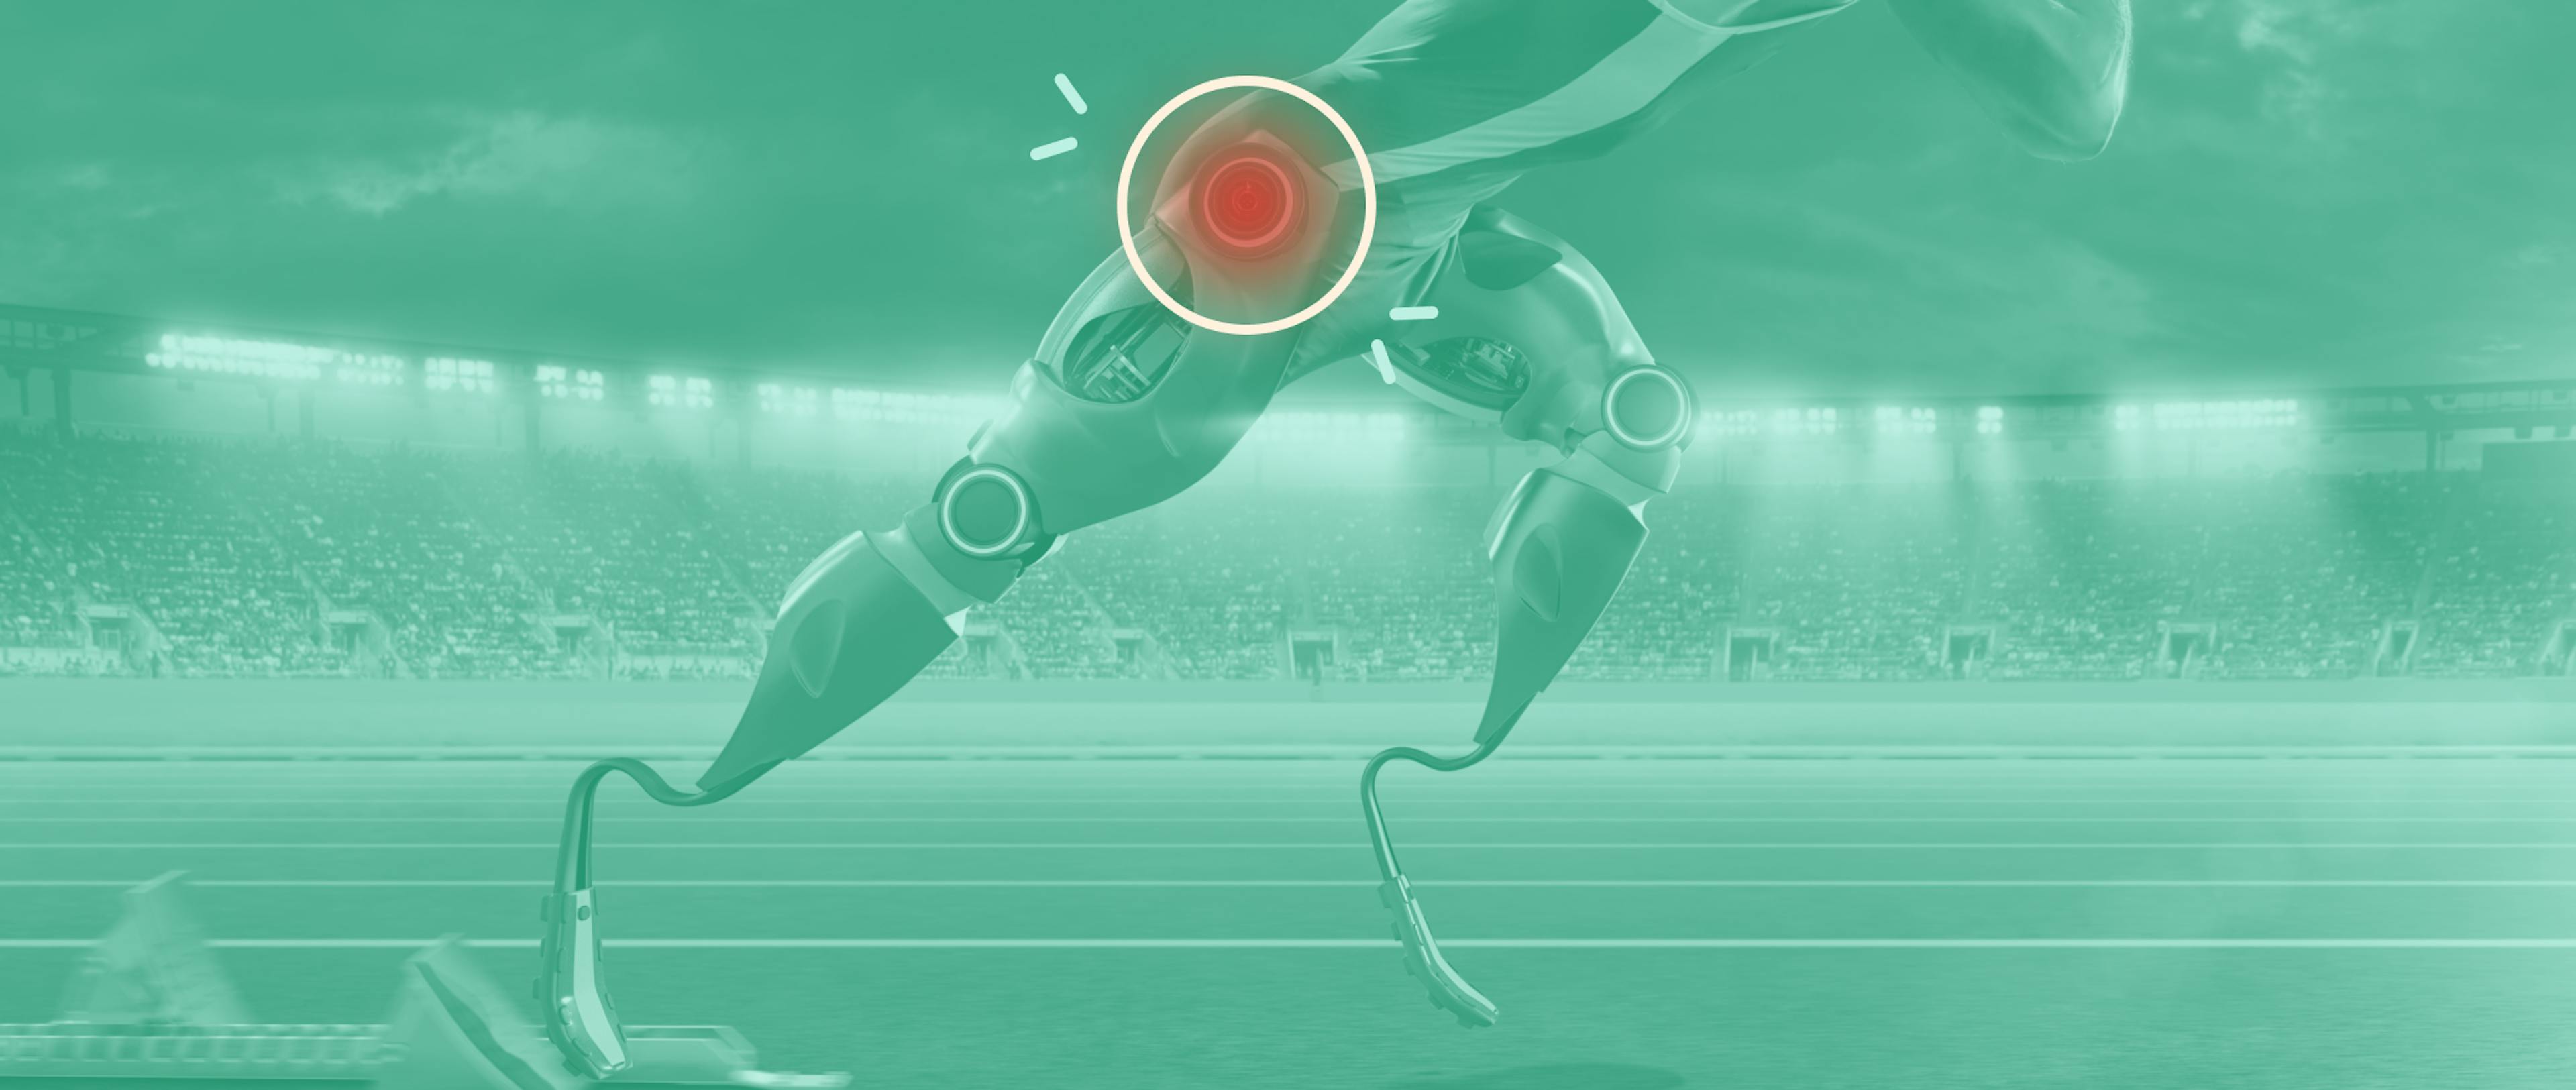 A humanoid robot with hip pain indicated in red is running in a stadium.